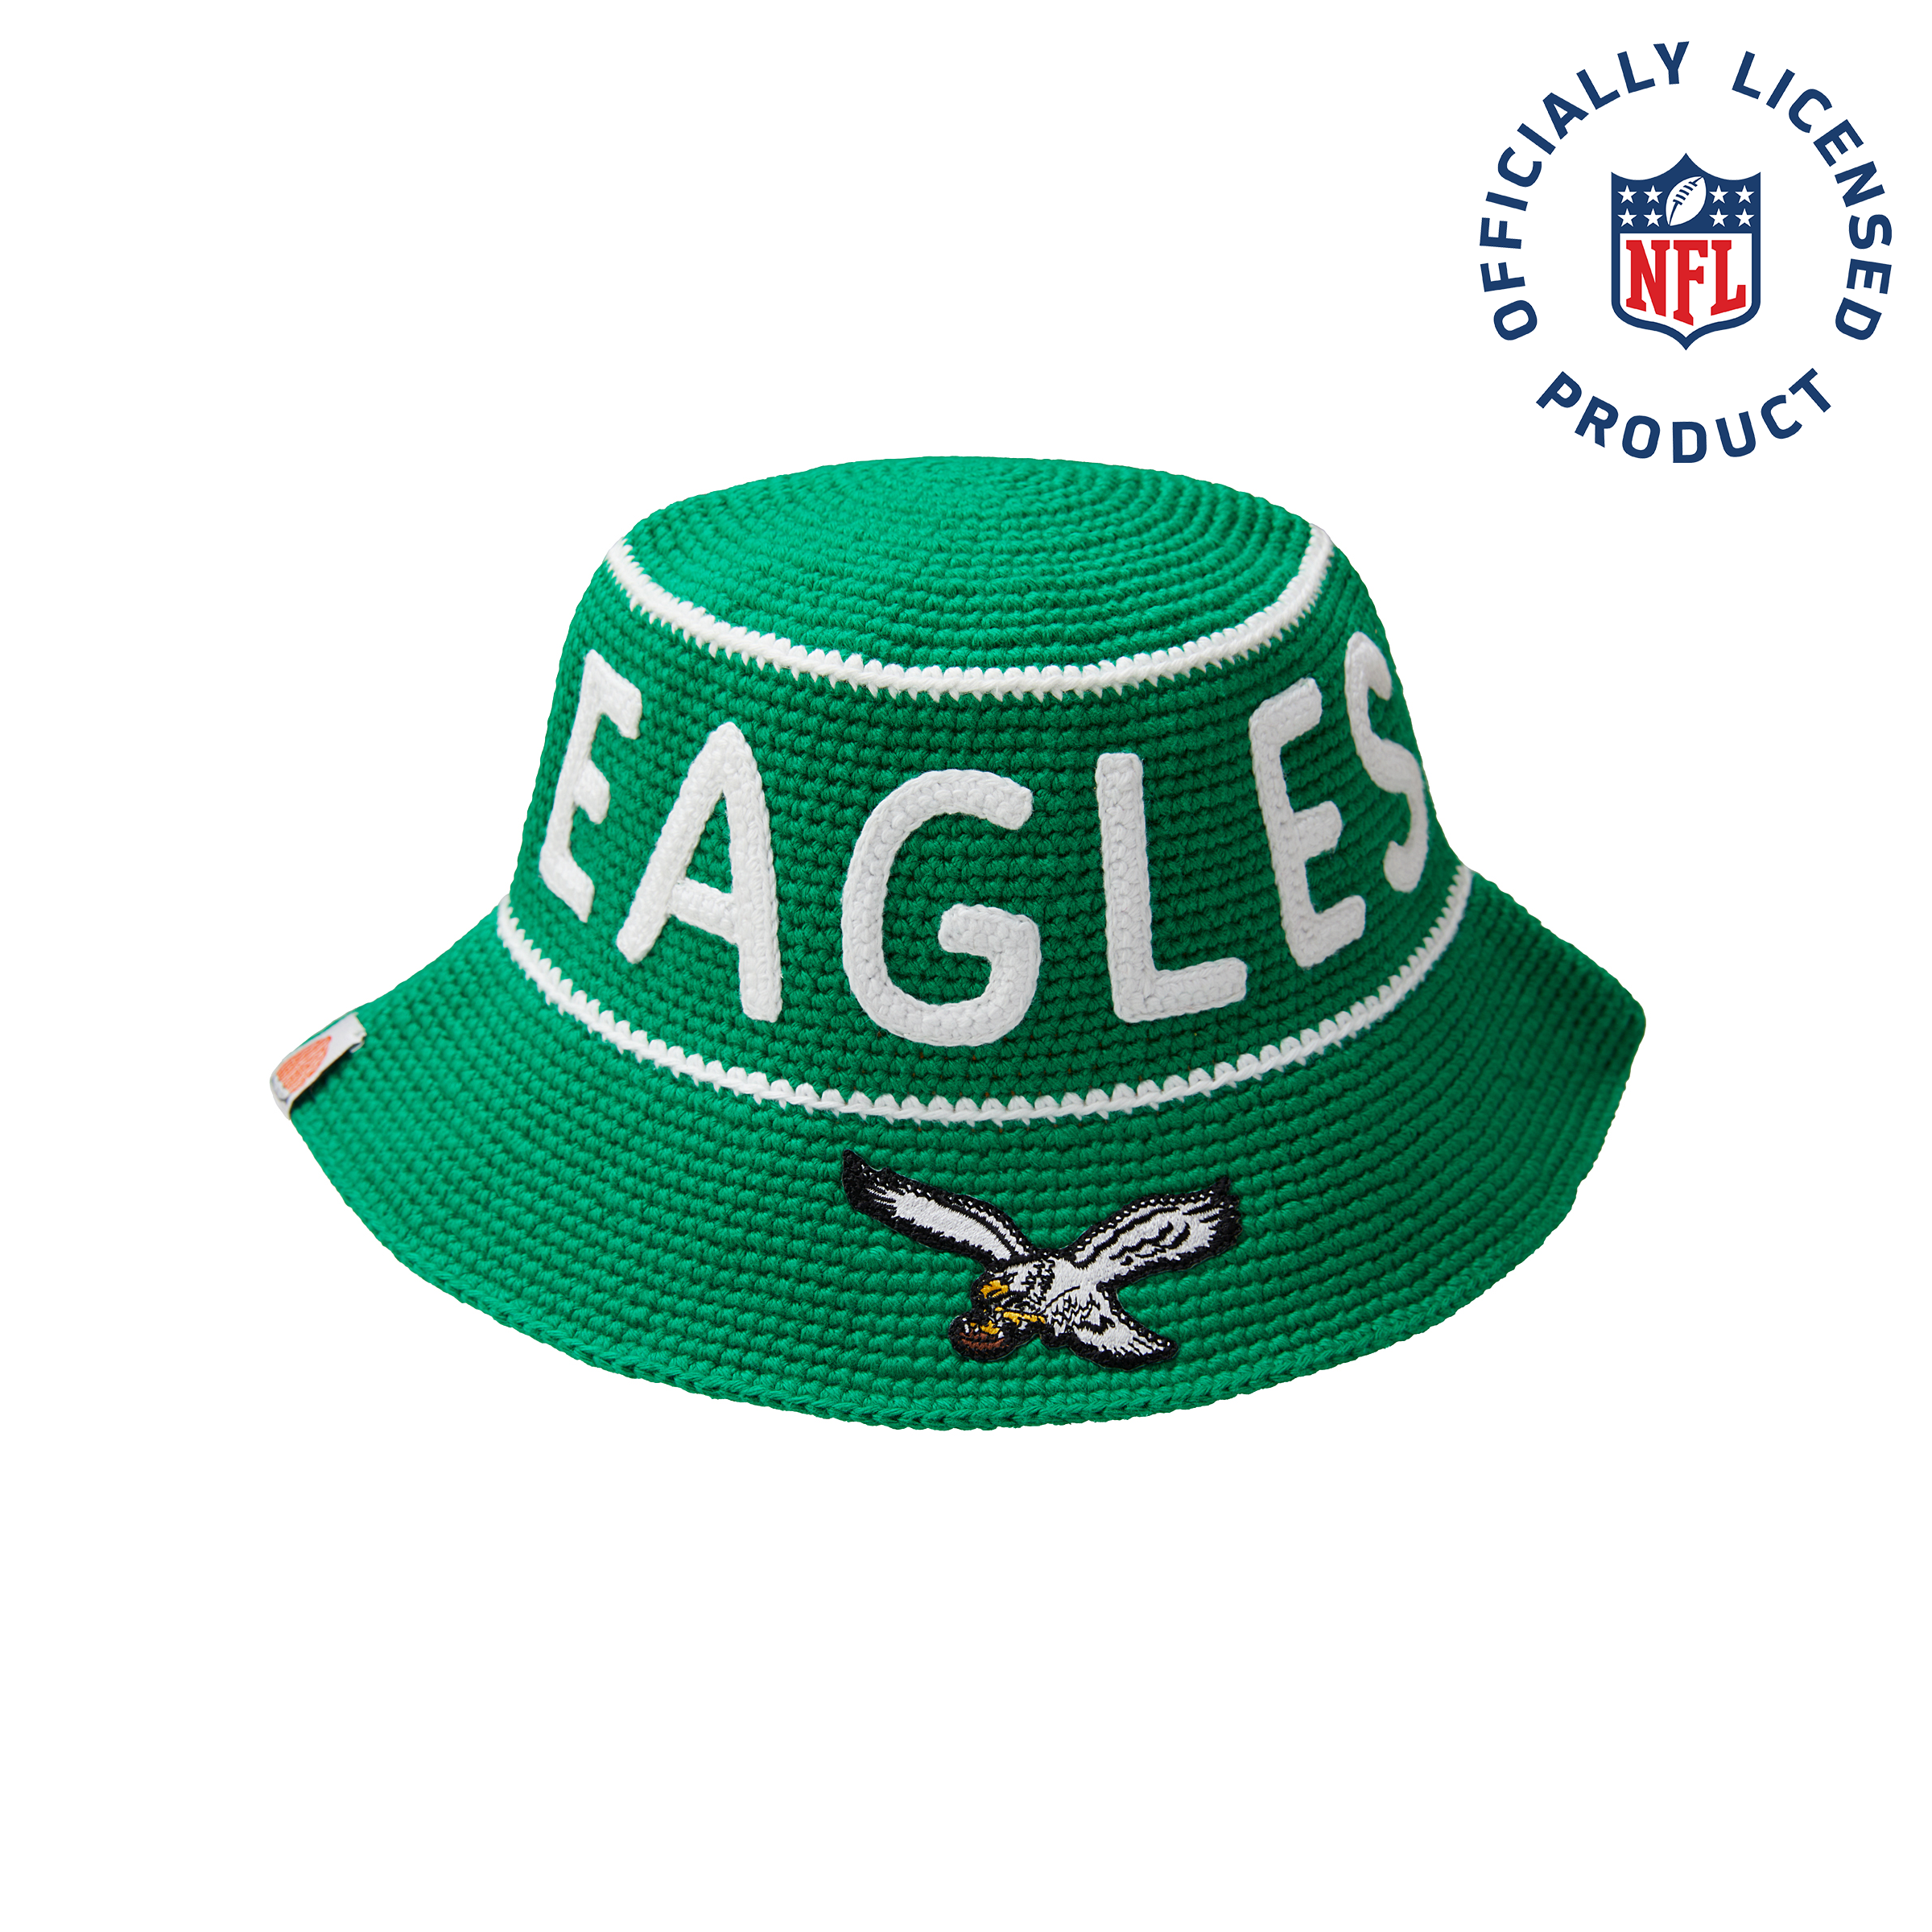 The Eagles NFL Bucket Hat